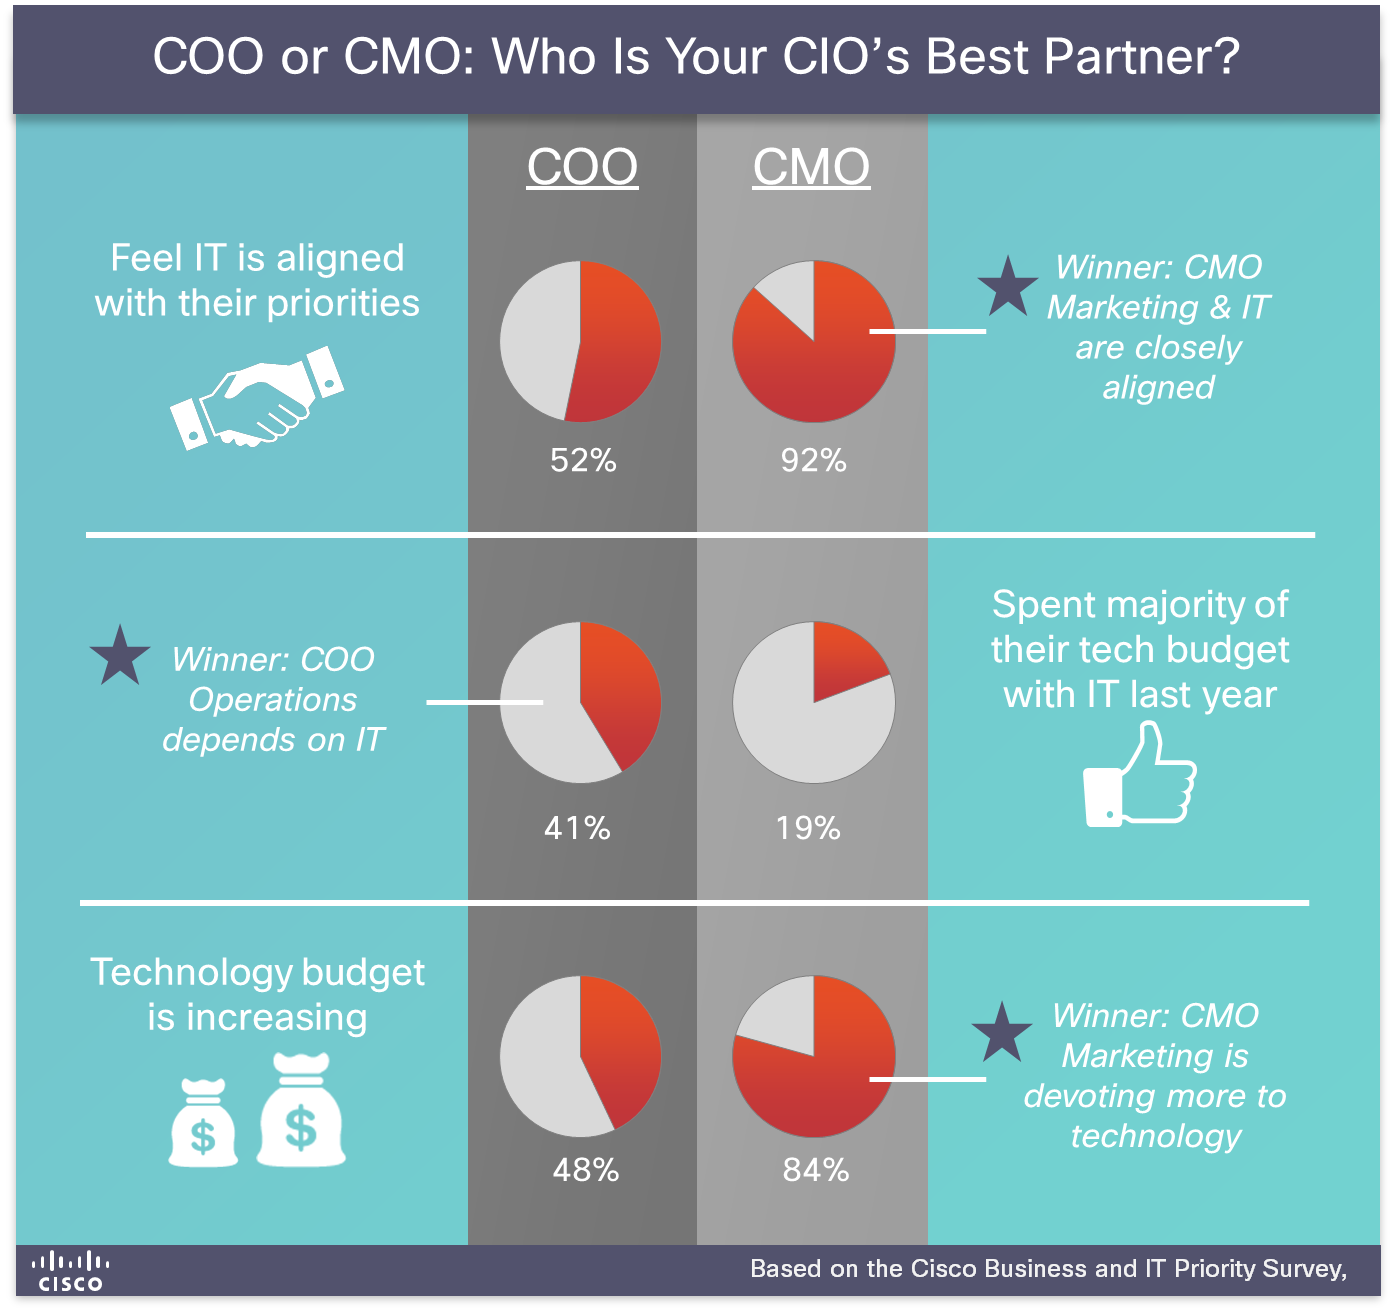 Is the COO or CMO a batter partner for CIOs?